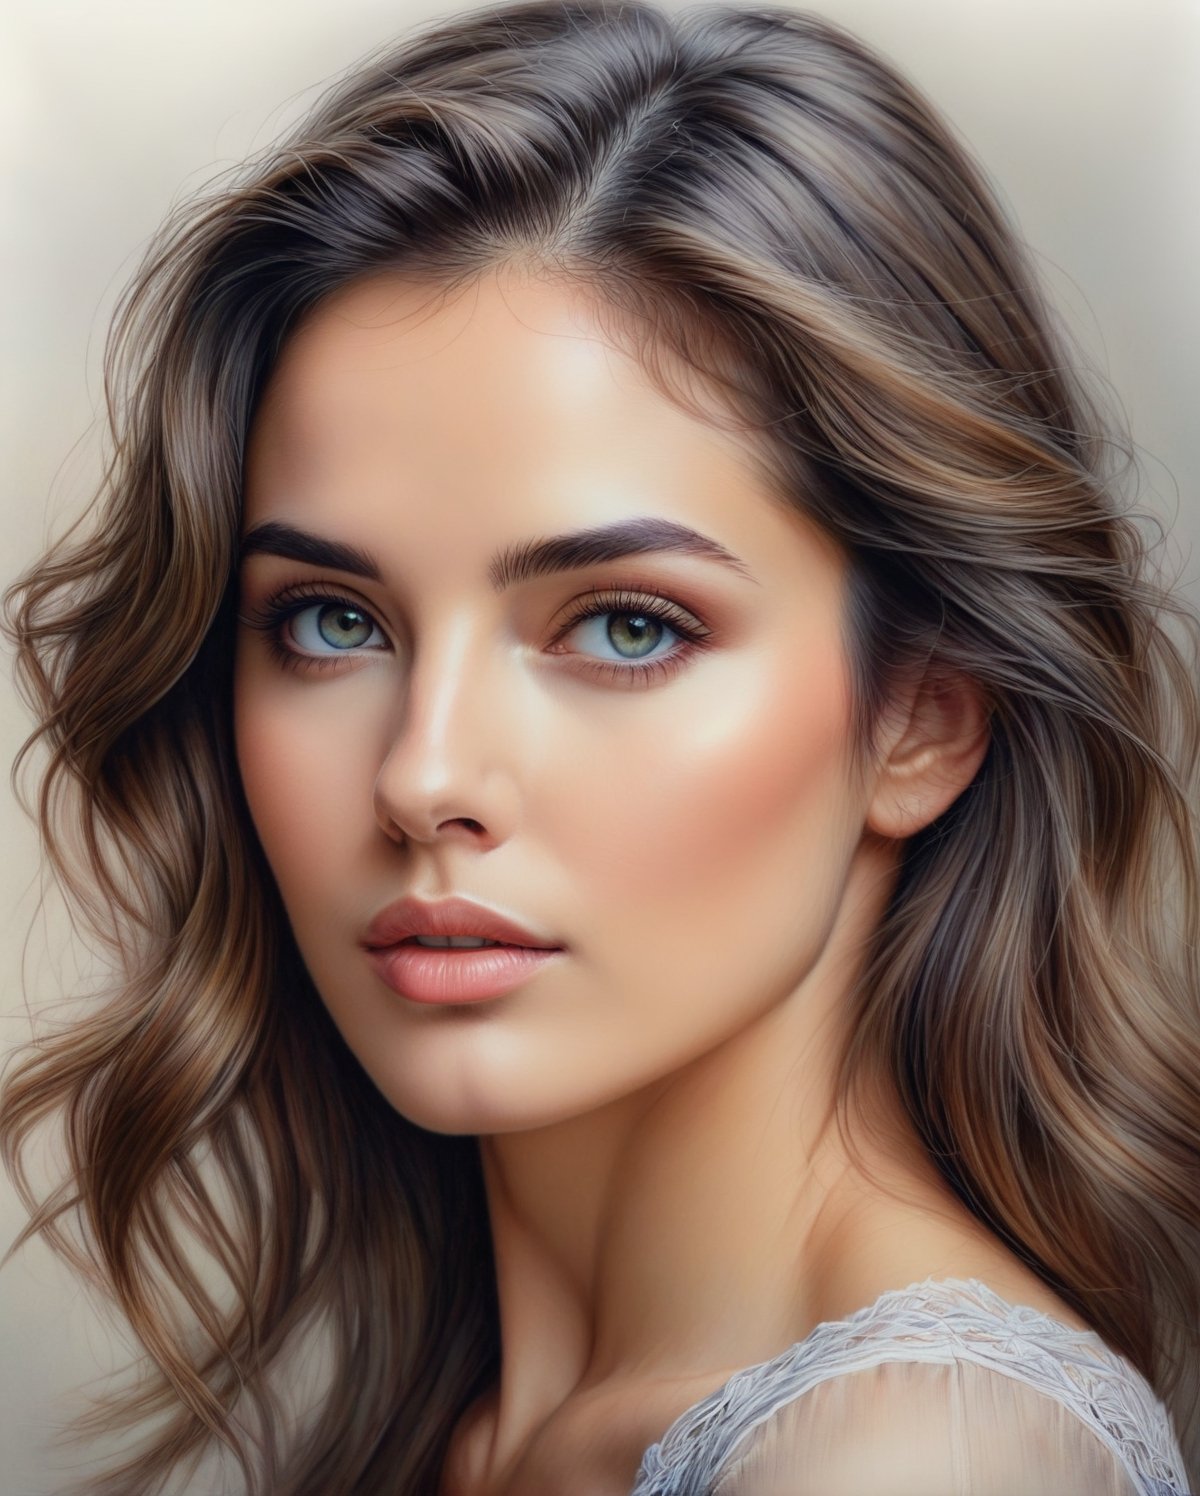 A beautifully rendered pastel color  pencil art portrait of a woman with a captivating gaze. The illustration showcases her delicate facial features, with soft shading and detailing that brings the image to life. The background is a subtle blend of gray tones, drawing focus to the woman's captivating expression and the intricate strands of her hair. The overall effect is a timeless, elegant piece that captures the essence of the subject's soul.,1girl,artint